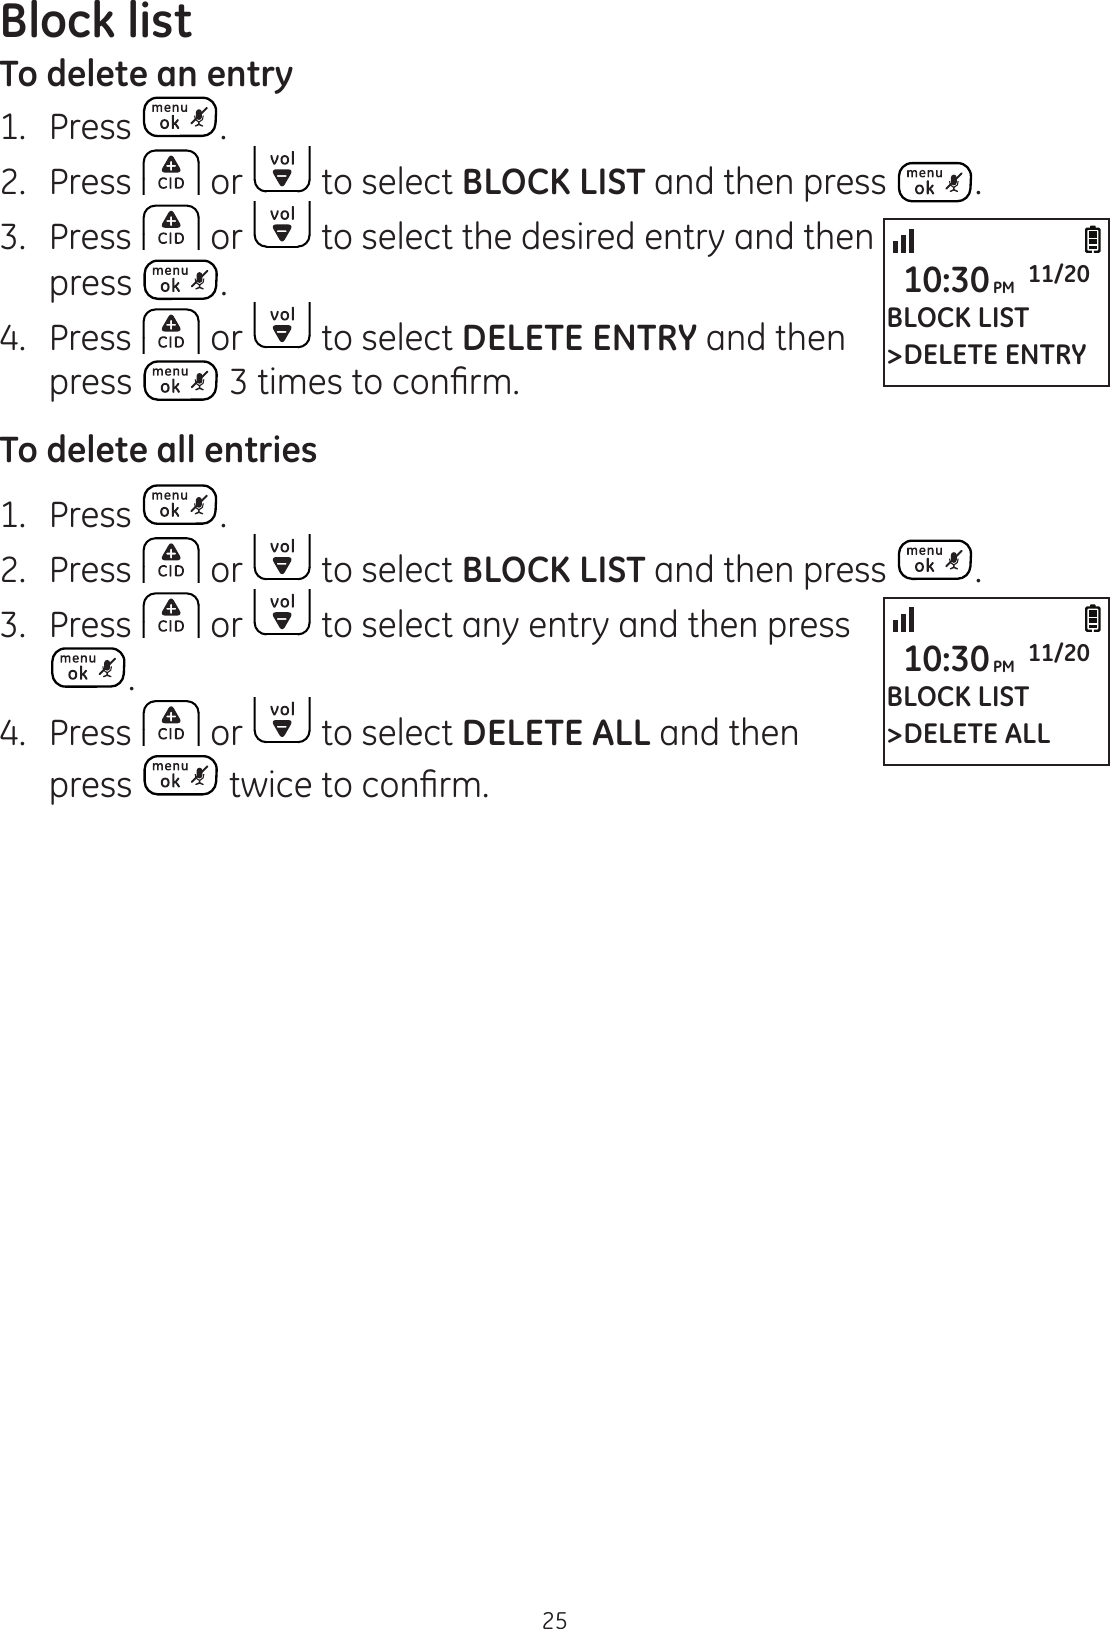 Block list25To delete an entry1.   Press . 2.  Press   or   to select BLOCK LIST and then press  .3.  Press   or   to select the desired entry and then press  . 4.  Press   or   to select DELETE ENTRY and then press  WLPHVWRFRQ¿UPTo delete all entries1.  Press  . 2.  Press   or   to select BLOCK LIST and then press  .3.  Press   or   to select any entry and then press .4.  Press   or   to select DELETE ALL and then press  WZLFHWRFRQ¿UPBLOCK LIST&gt;DELETE ENTRY10:30PM 11/20BLOCK LIST&gt;DELETE ALL10:30PM 11/20